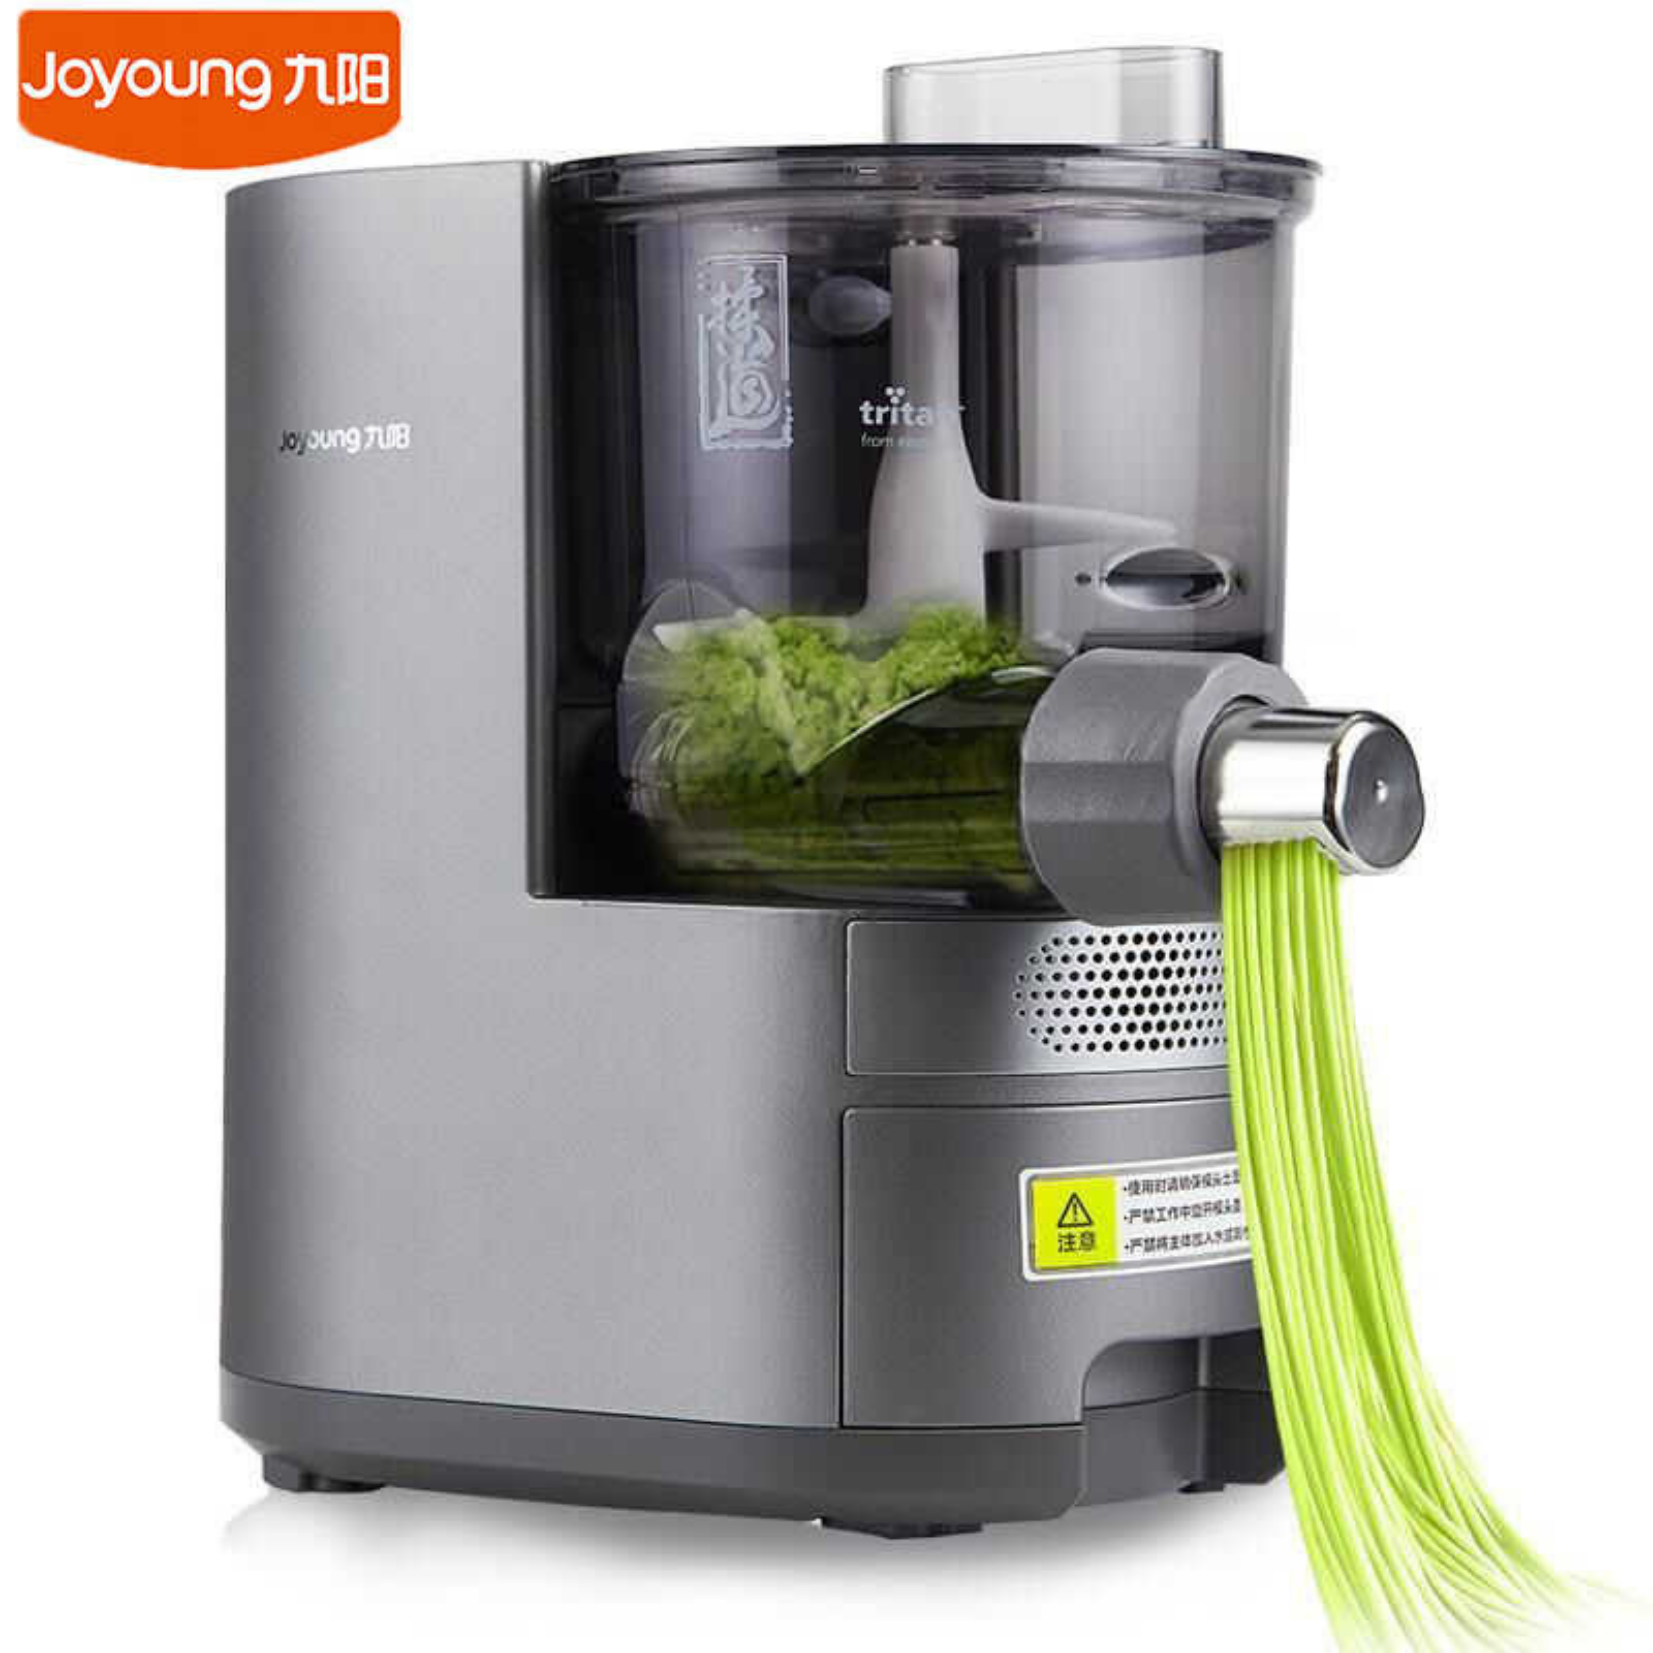 Joyoung Smart Noodles Machine | 7 Kinds Molds | Upgraded Dough Function | Suitable For Making Bread